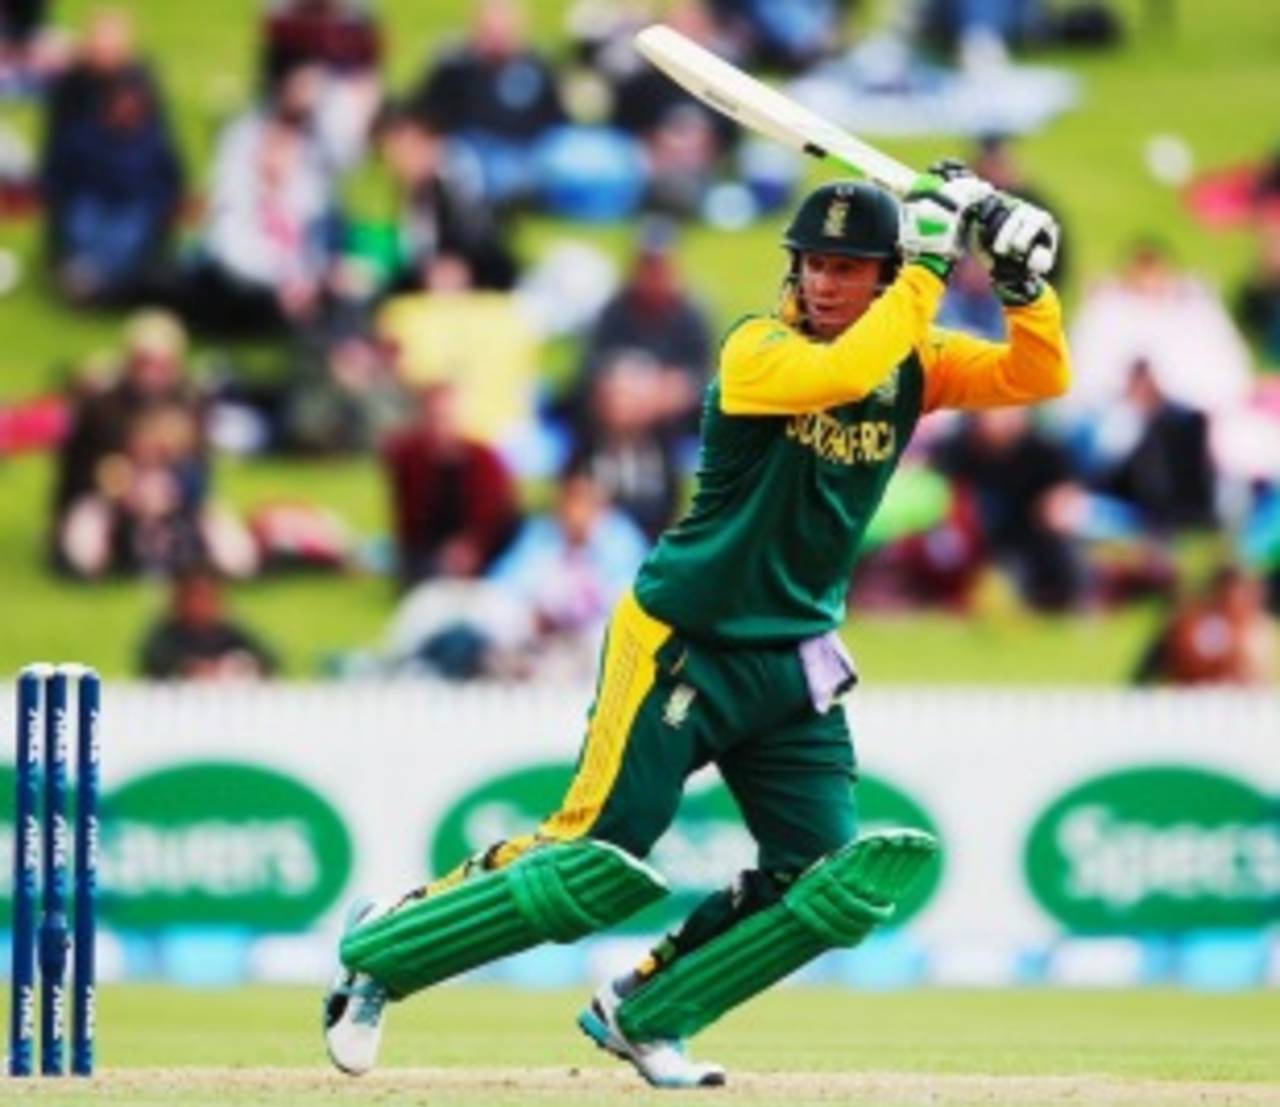 AB de Villiers cuts behind point, New Zealand v South Africa, 3rd ODI, Hamilton, October 27, 2014